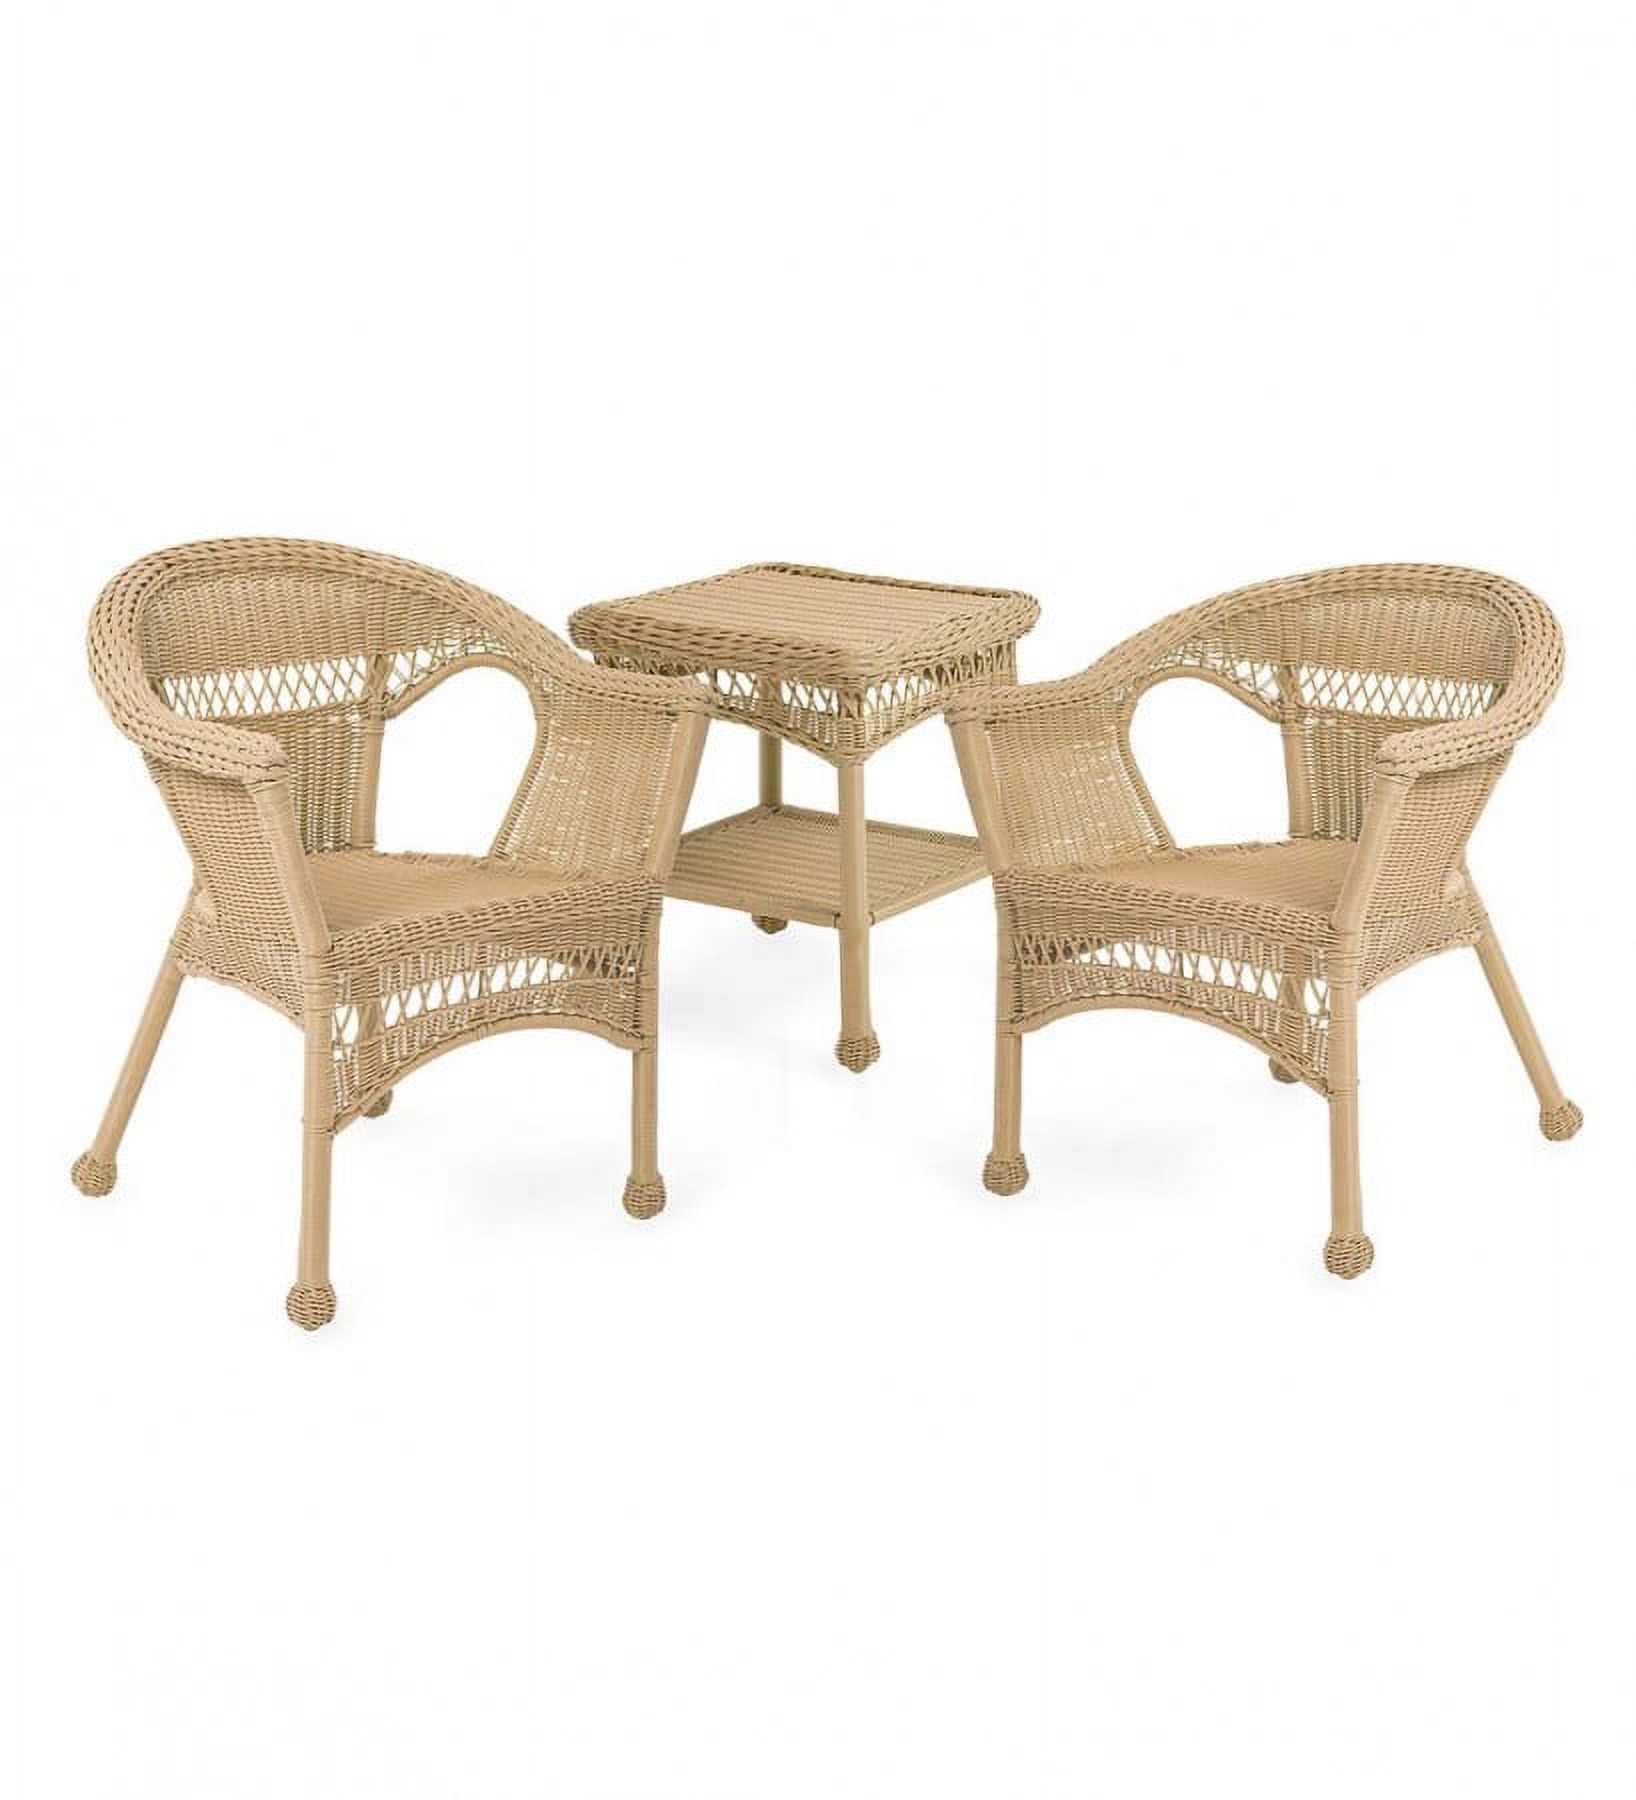 Plow & Hearth Easy Care Resin Wicker Furniture Set, Two Chairs and End Table - Off-White - image 2 of 2